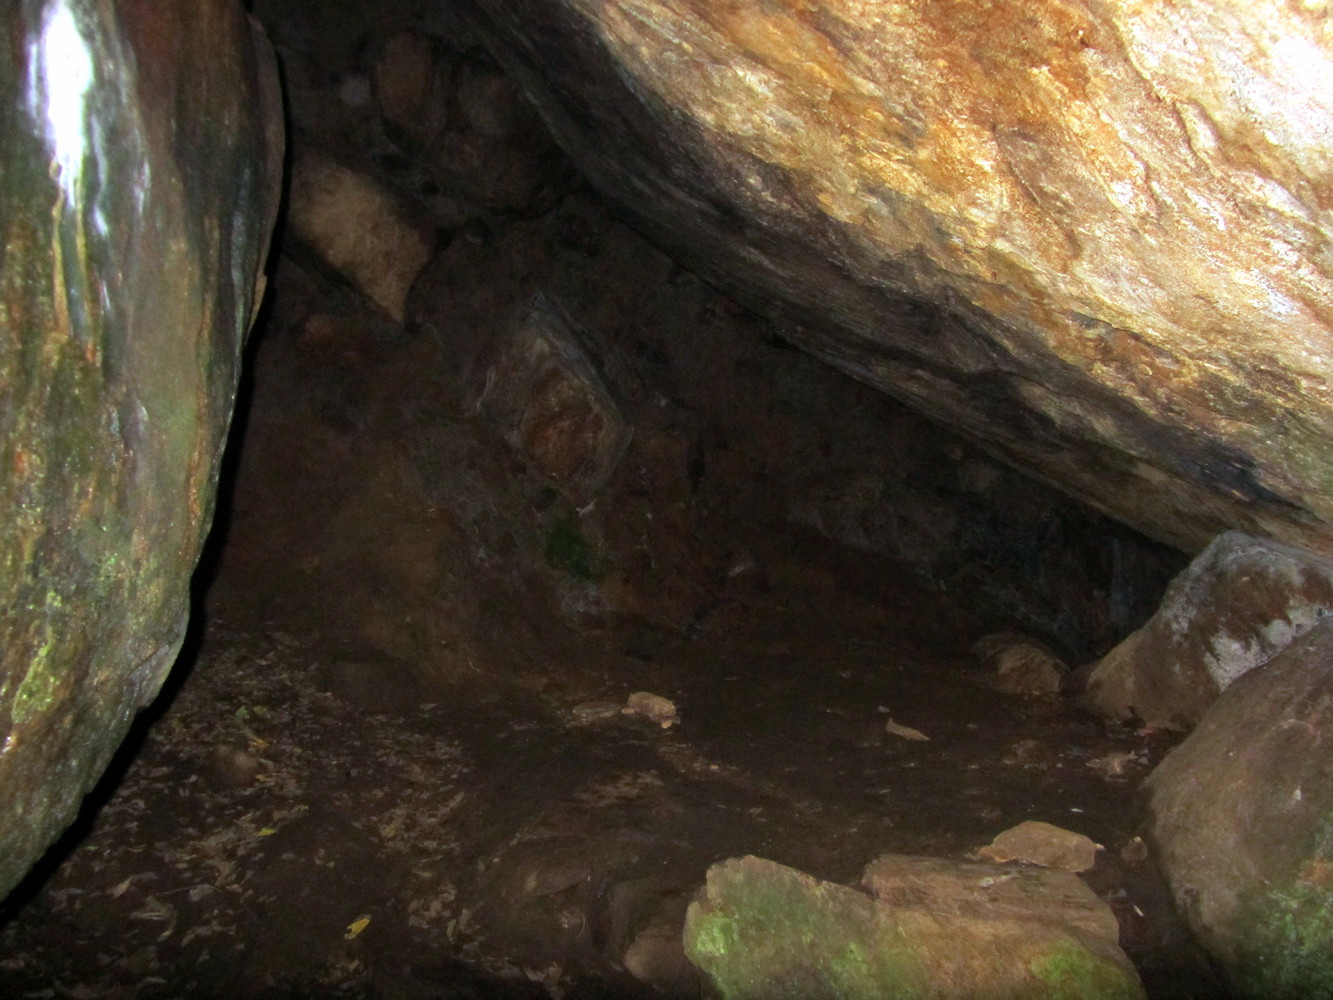 A cave formed by an enclosure of large rocks